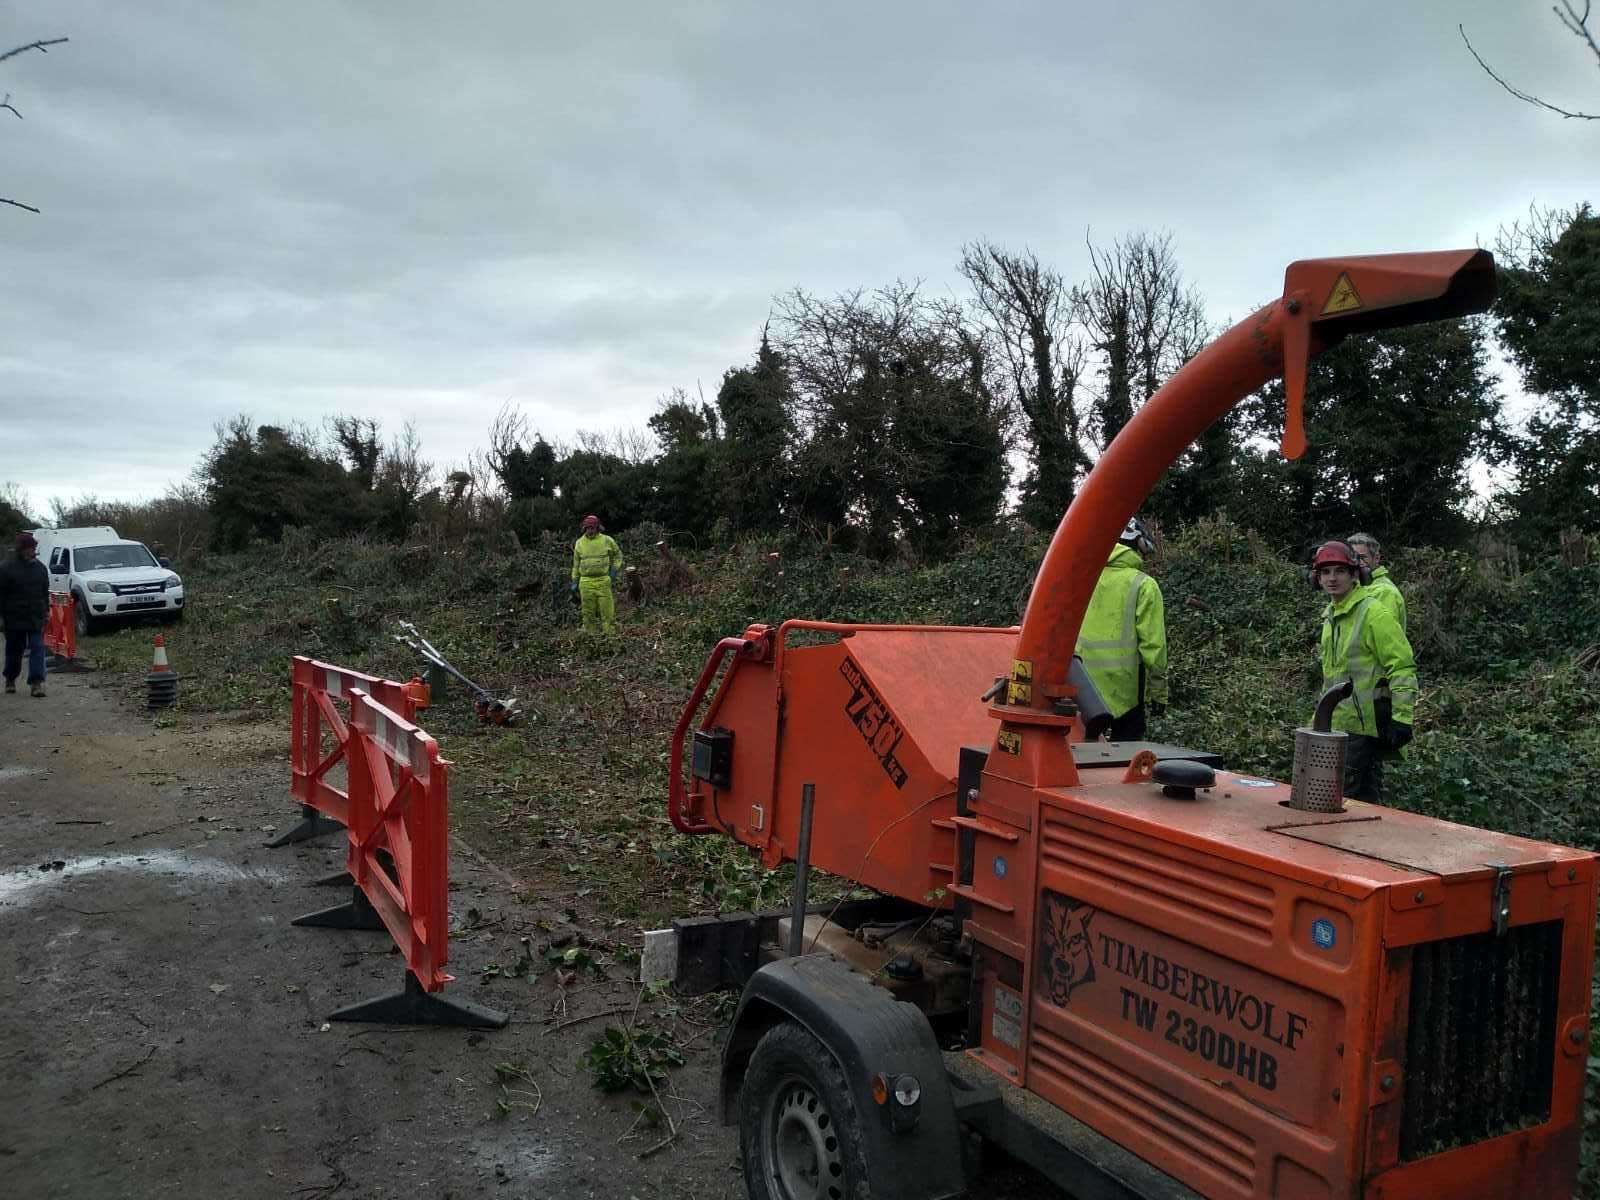 The council previously started works to remove dead trees and dense vegetation from the site. Picture: Mike Blakemore